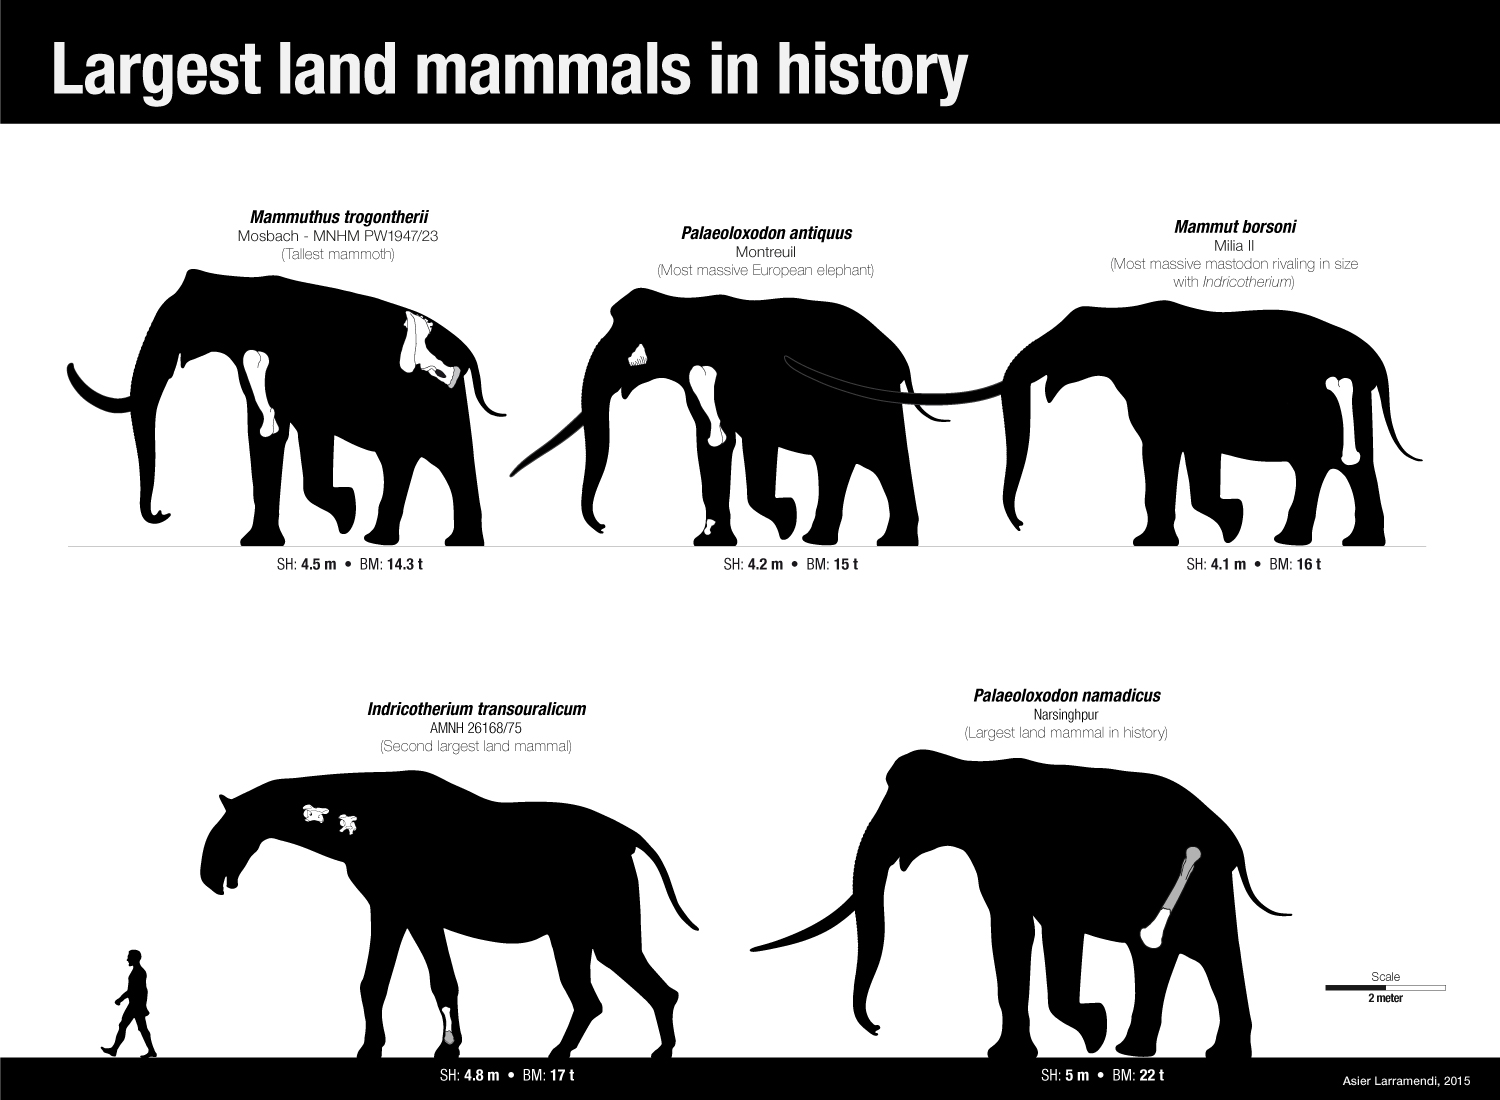 What are the 3 largest mammals?